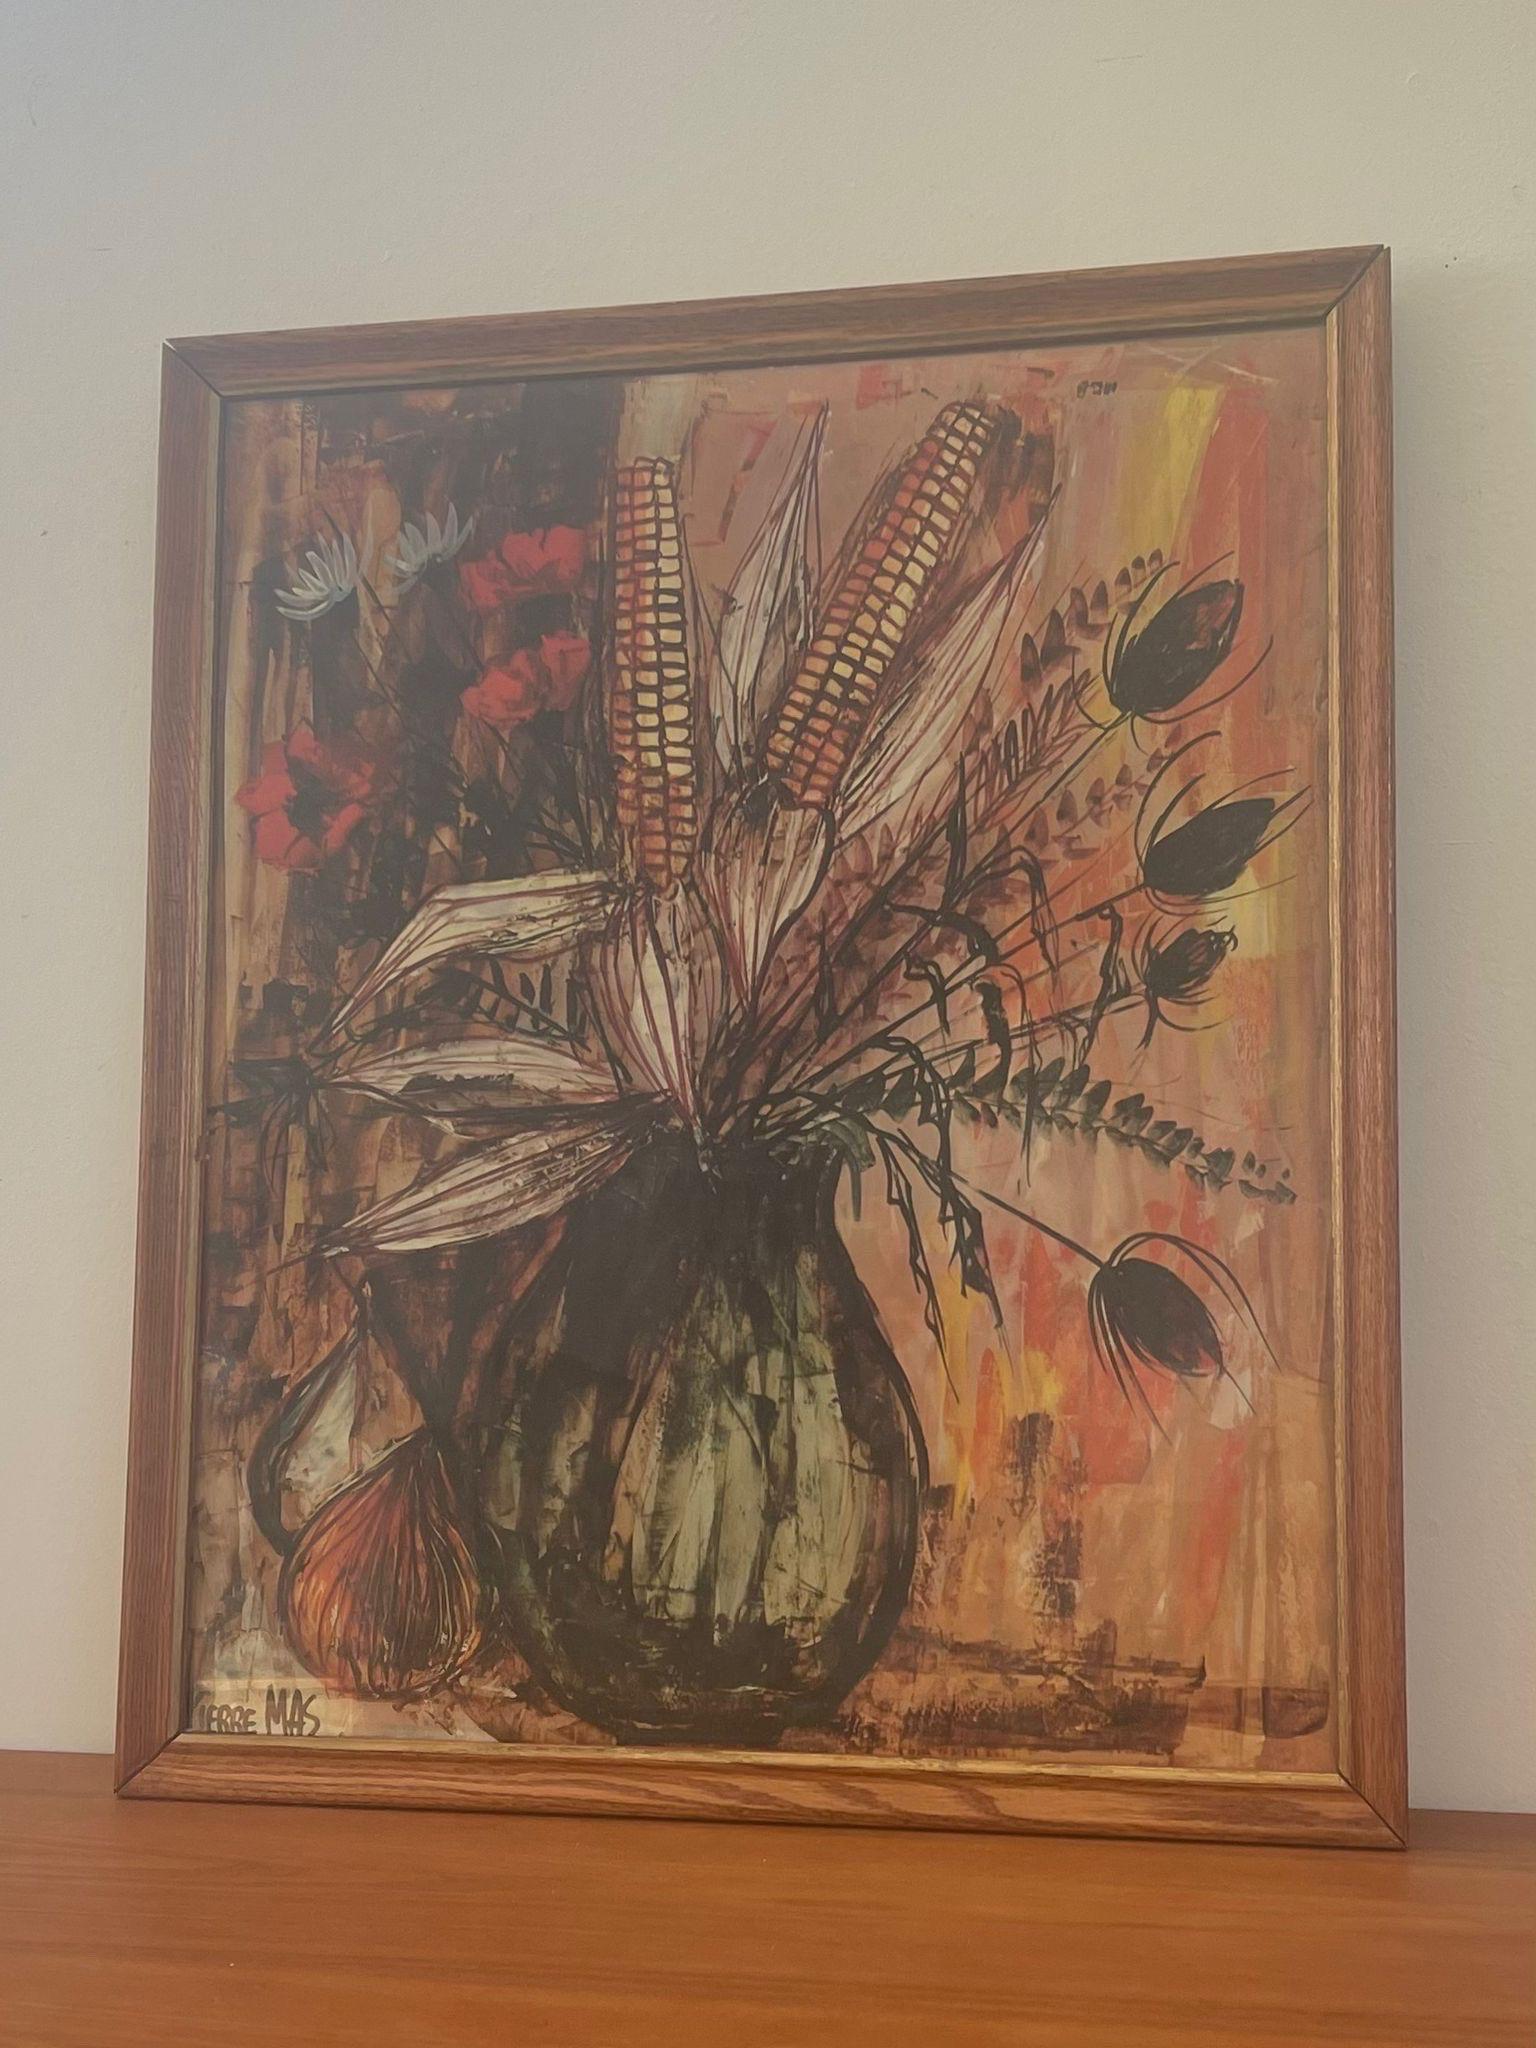 Vintage Print on Paper with Wooden Frame. Abstract Corn Bouquet will Warm Toned Colors throughout. Signed Pierre Mas. Frame has Gold Accents. Vintage Condition Consistent with Age as Pictured.

Dimensions. 26 H ; 1/2 D ; 26 H